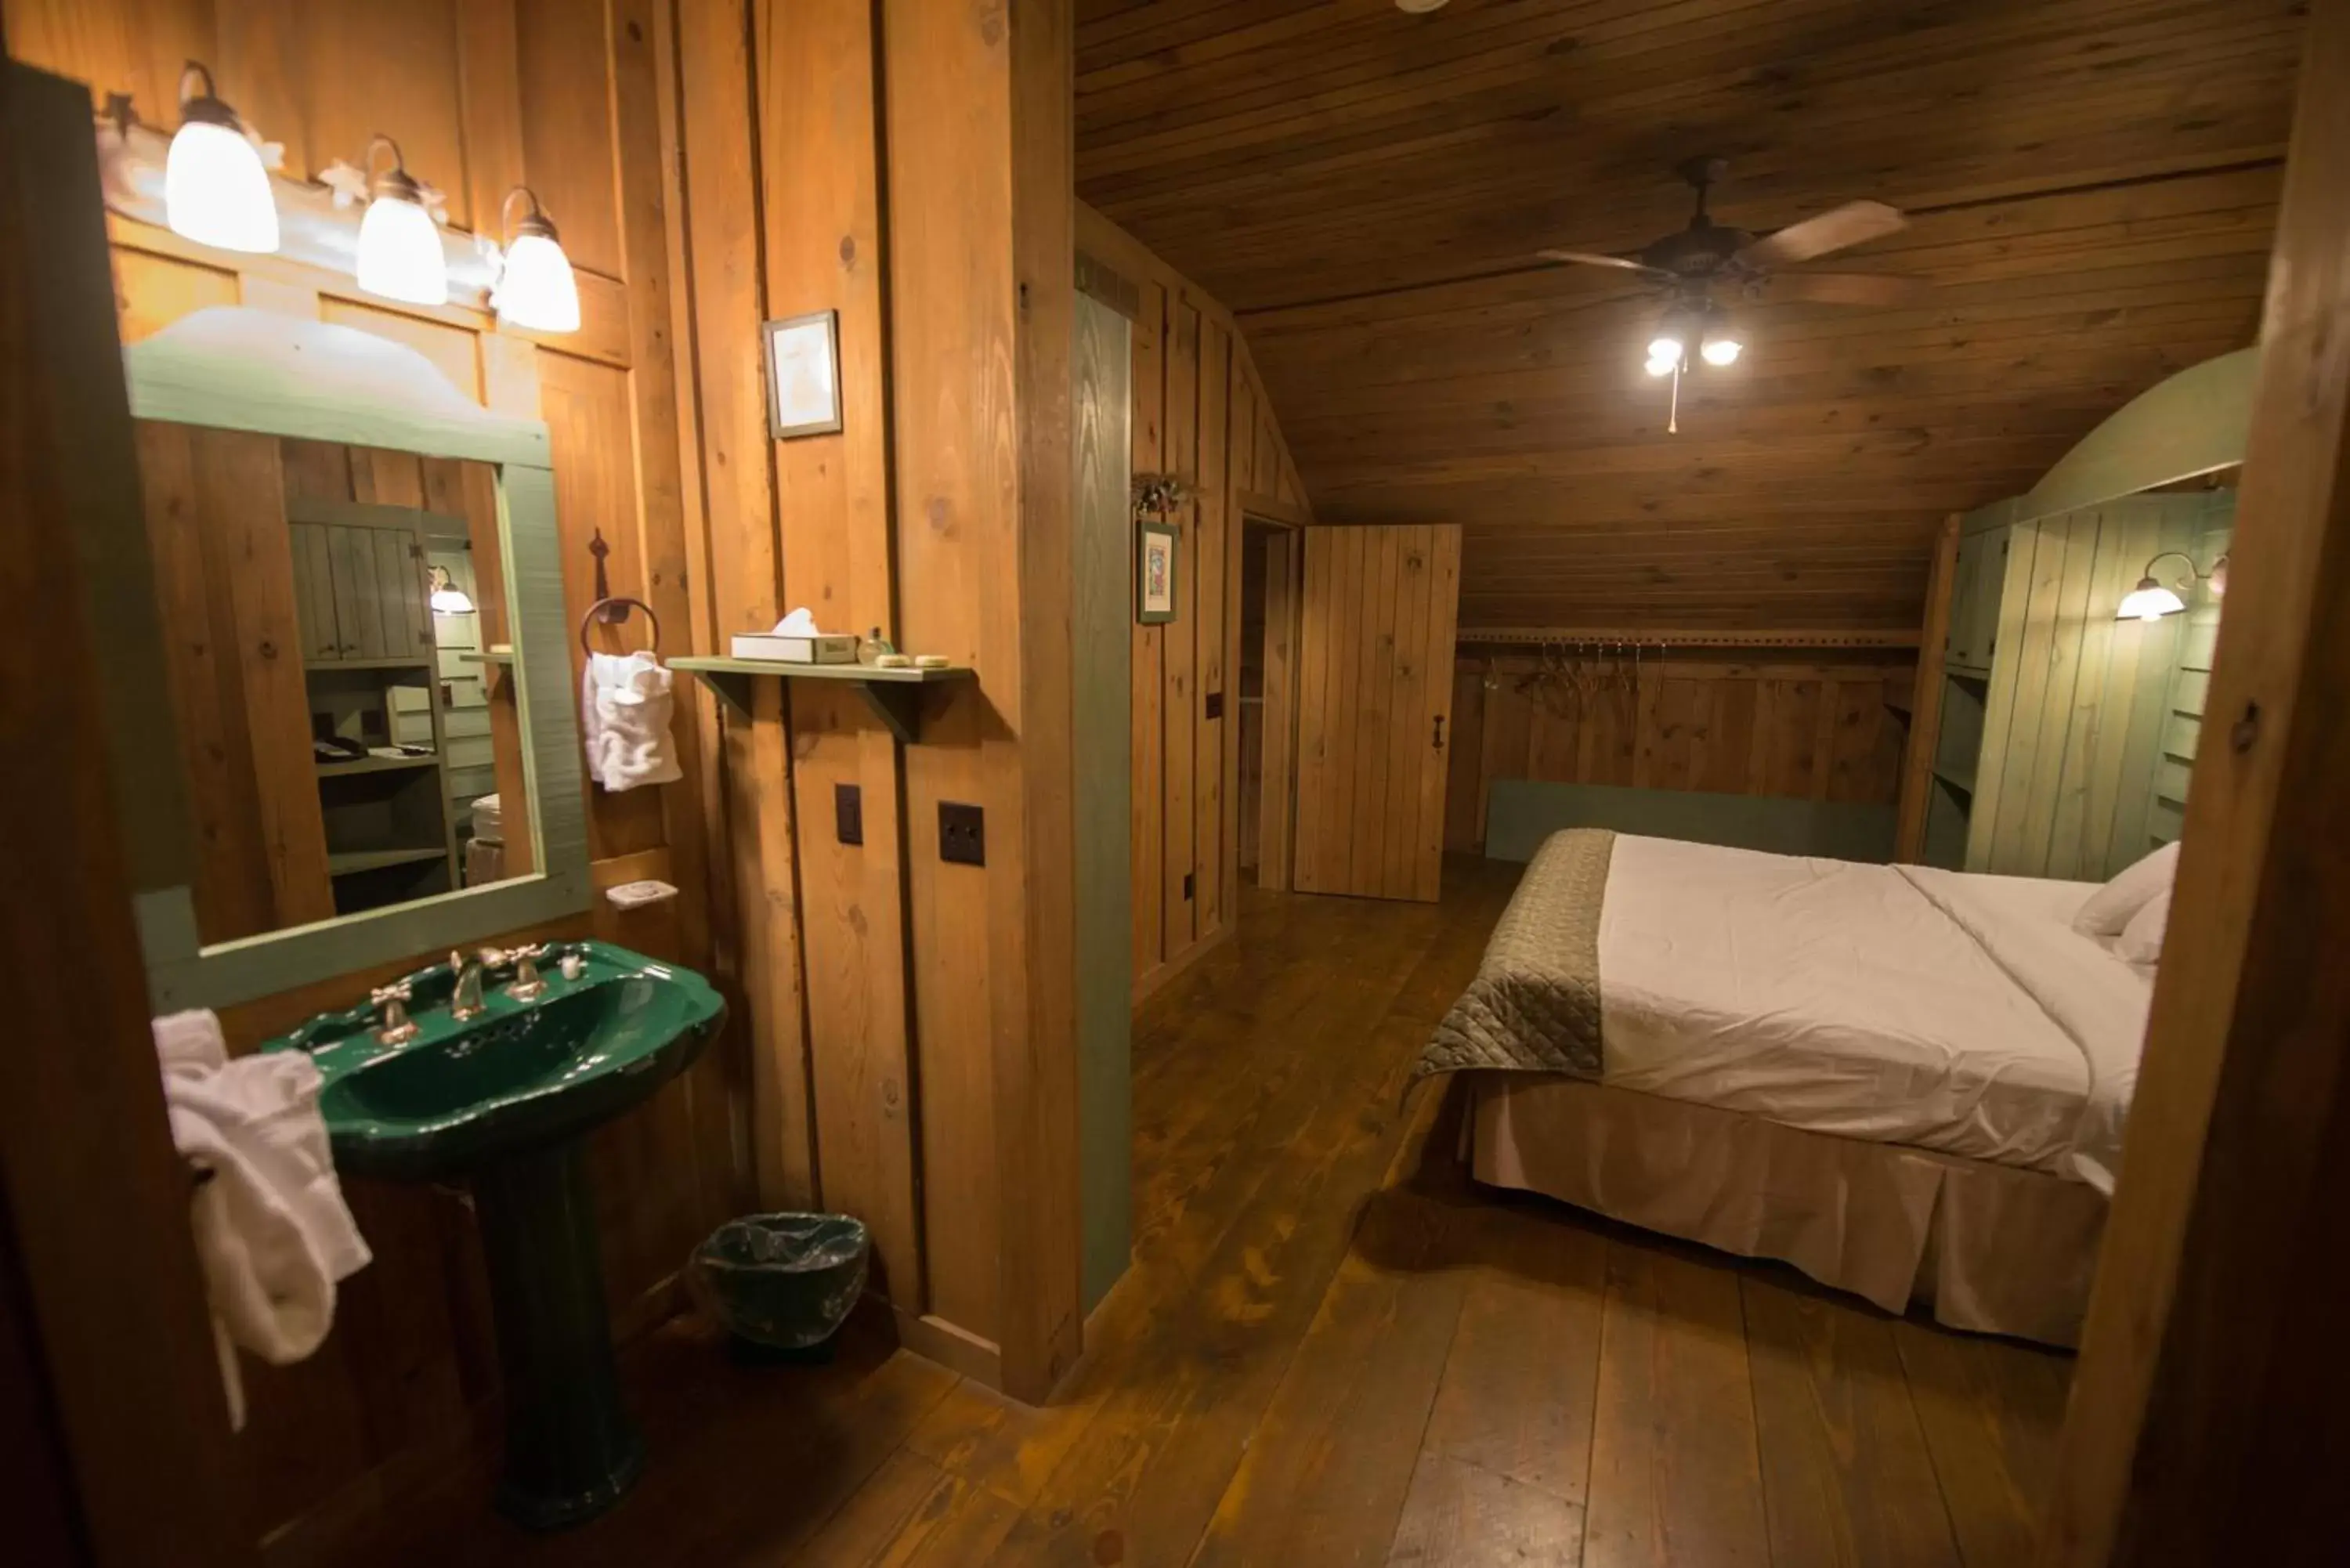 Bathroom, Room Photo in Cabins at Green Mountain, Trademark Collection by Wyndham